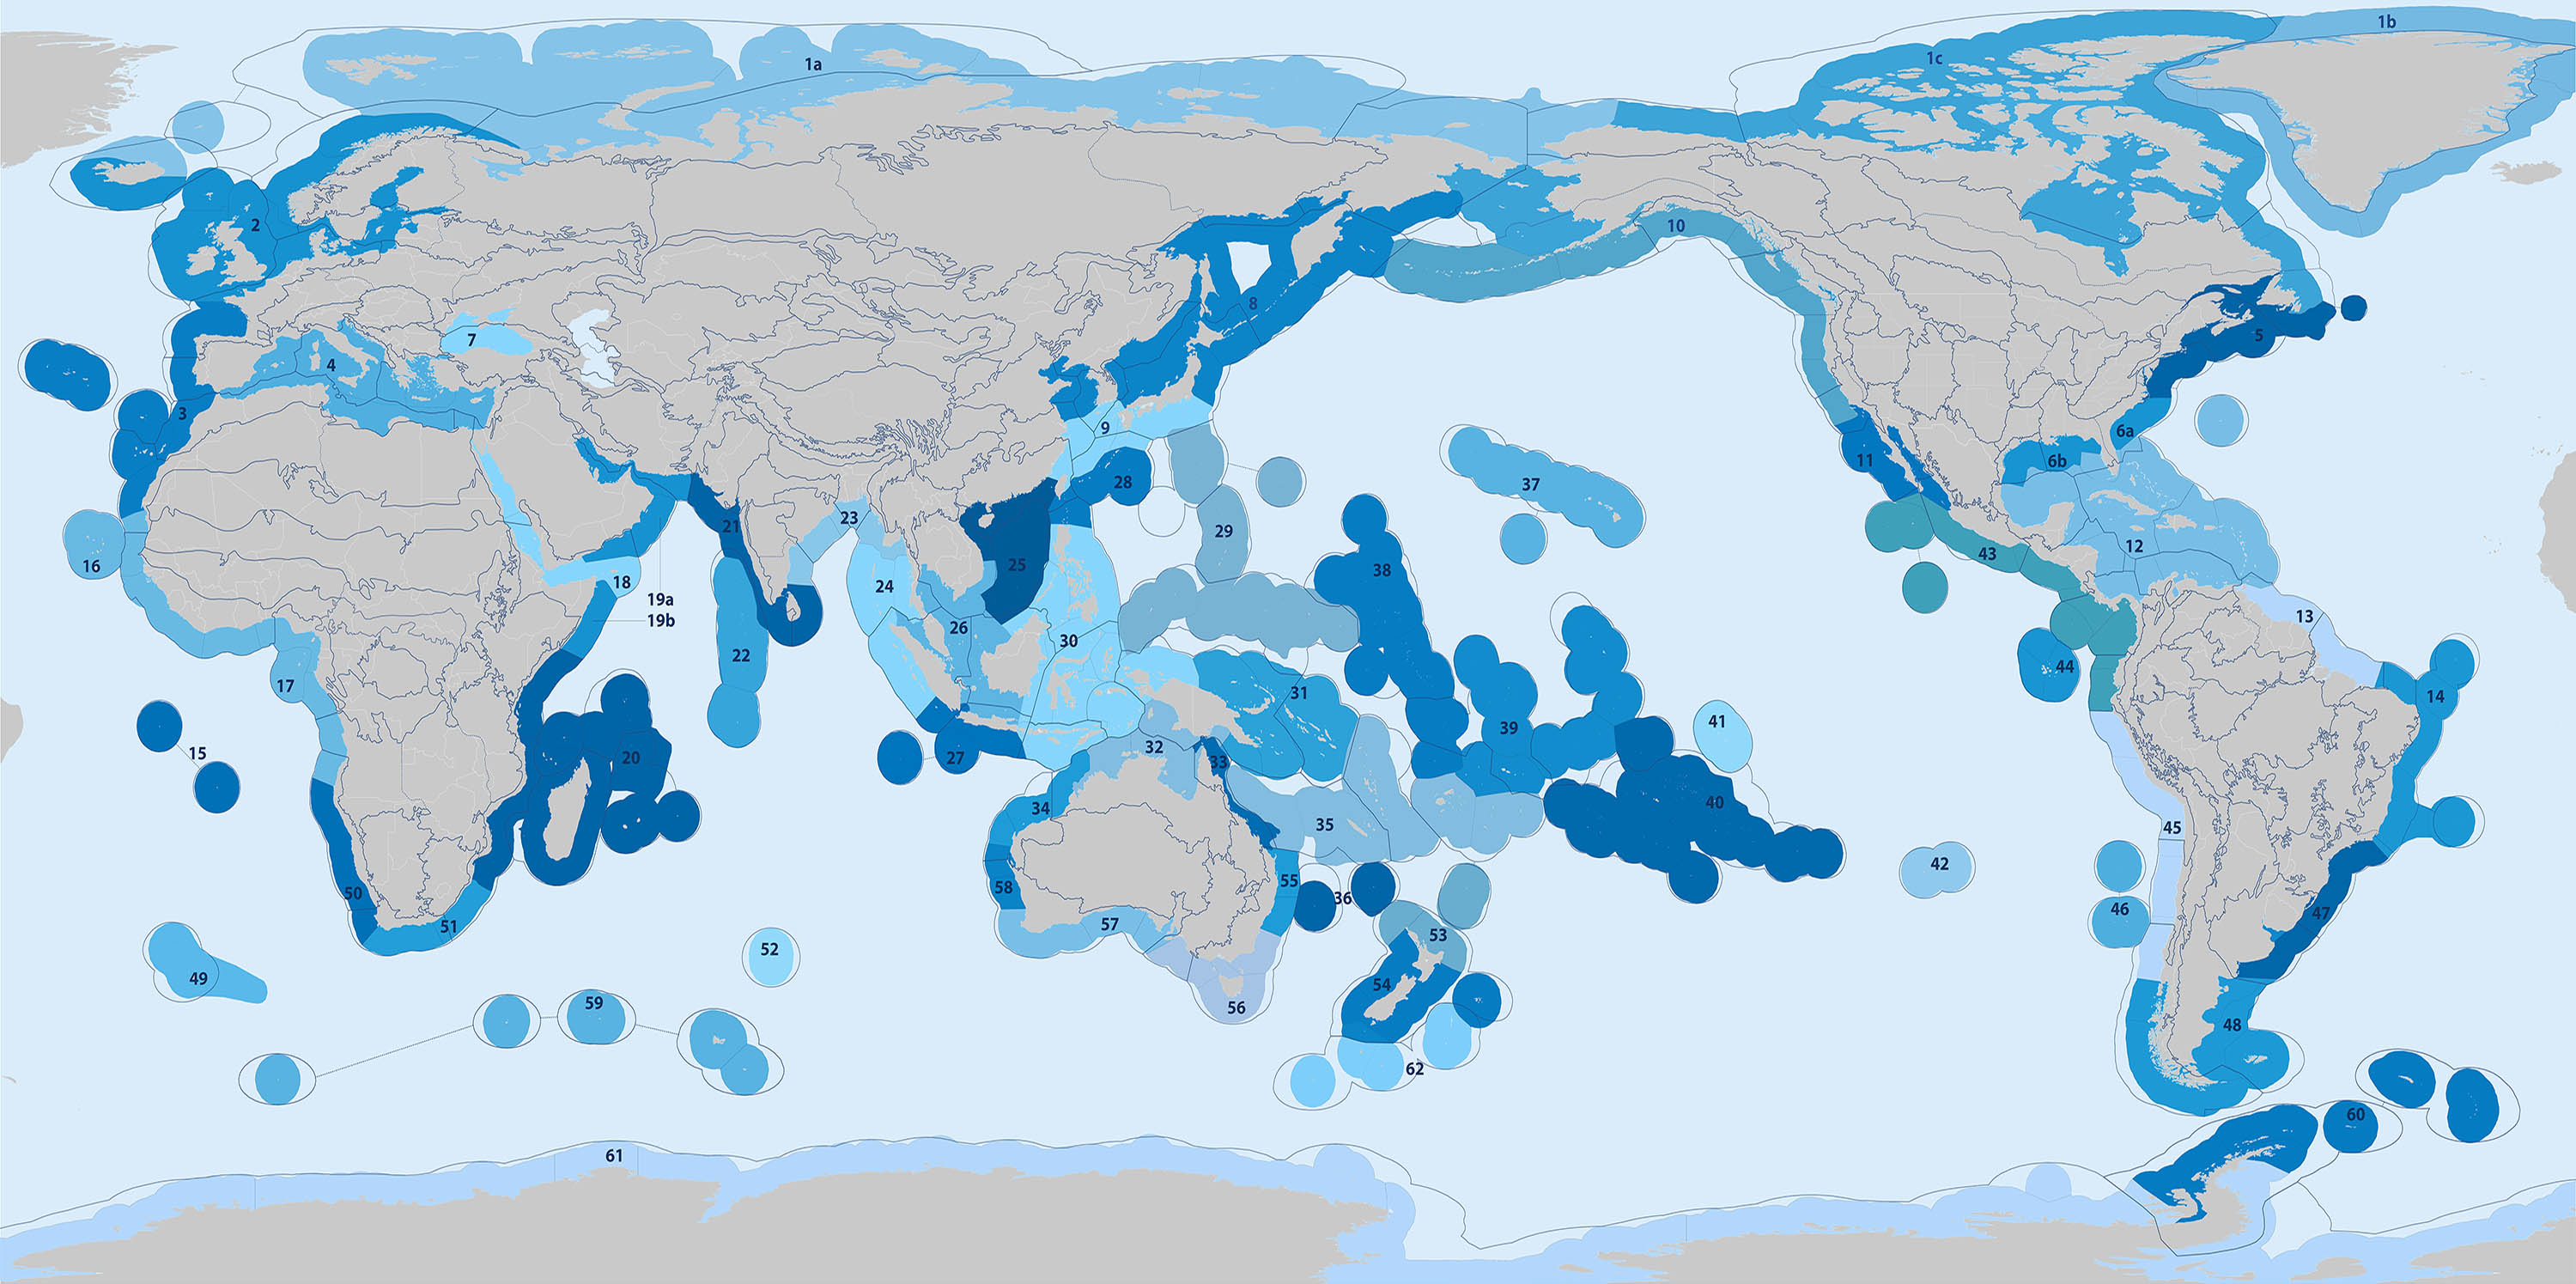 The 62 marine provinces from “Marine Ecoregions of the World” (Spalding et al. 2007) overlayed with One Earth's Bioregions polygons.